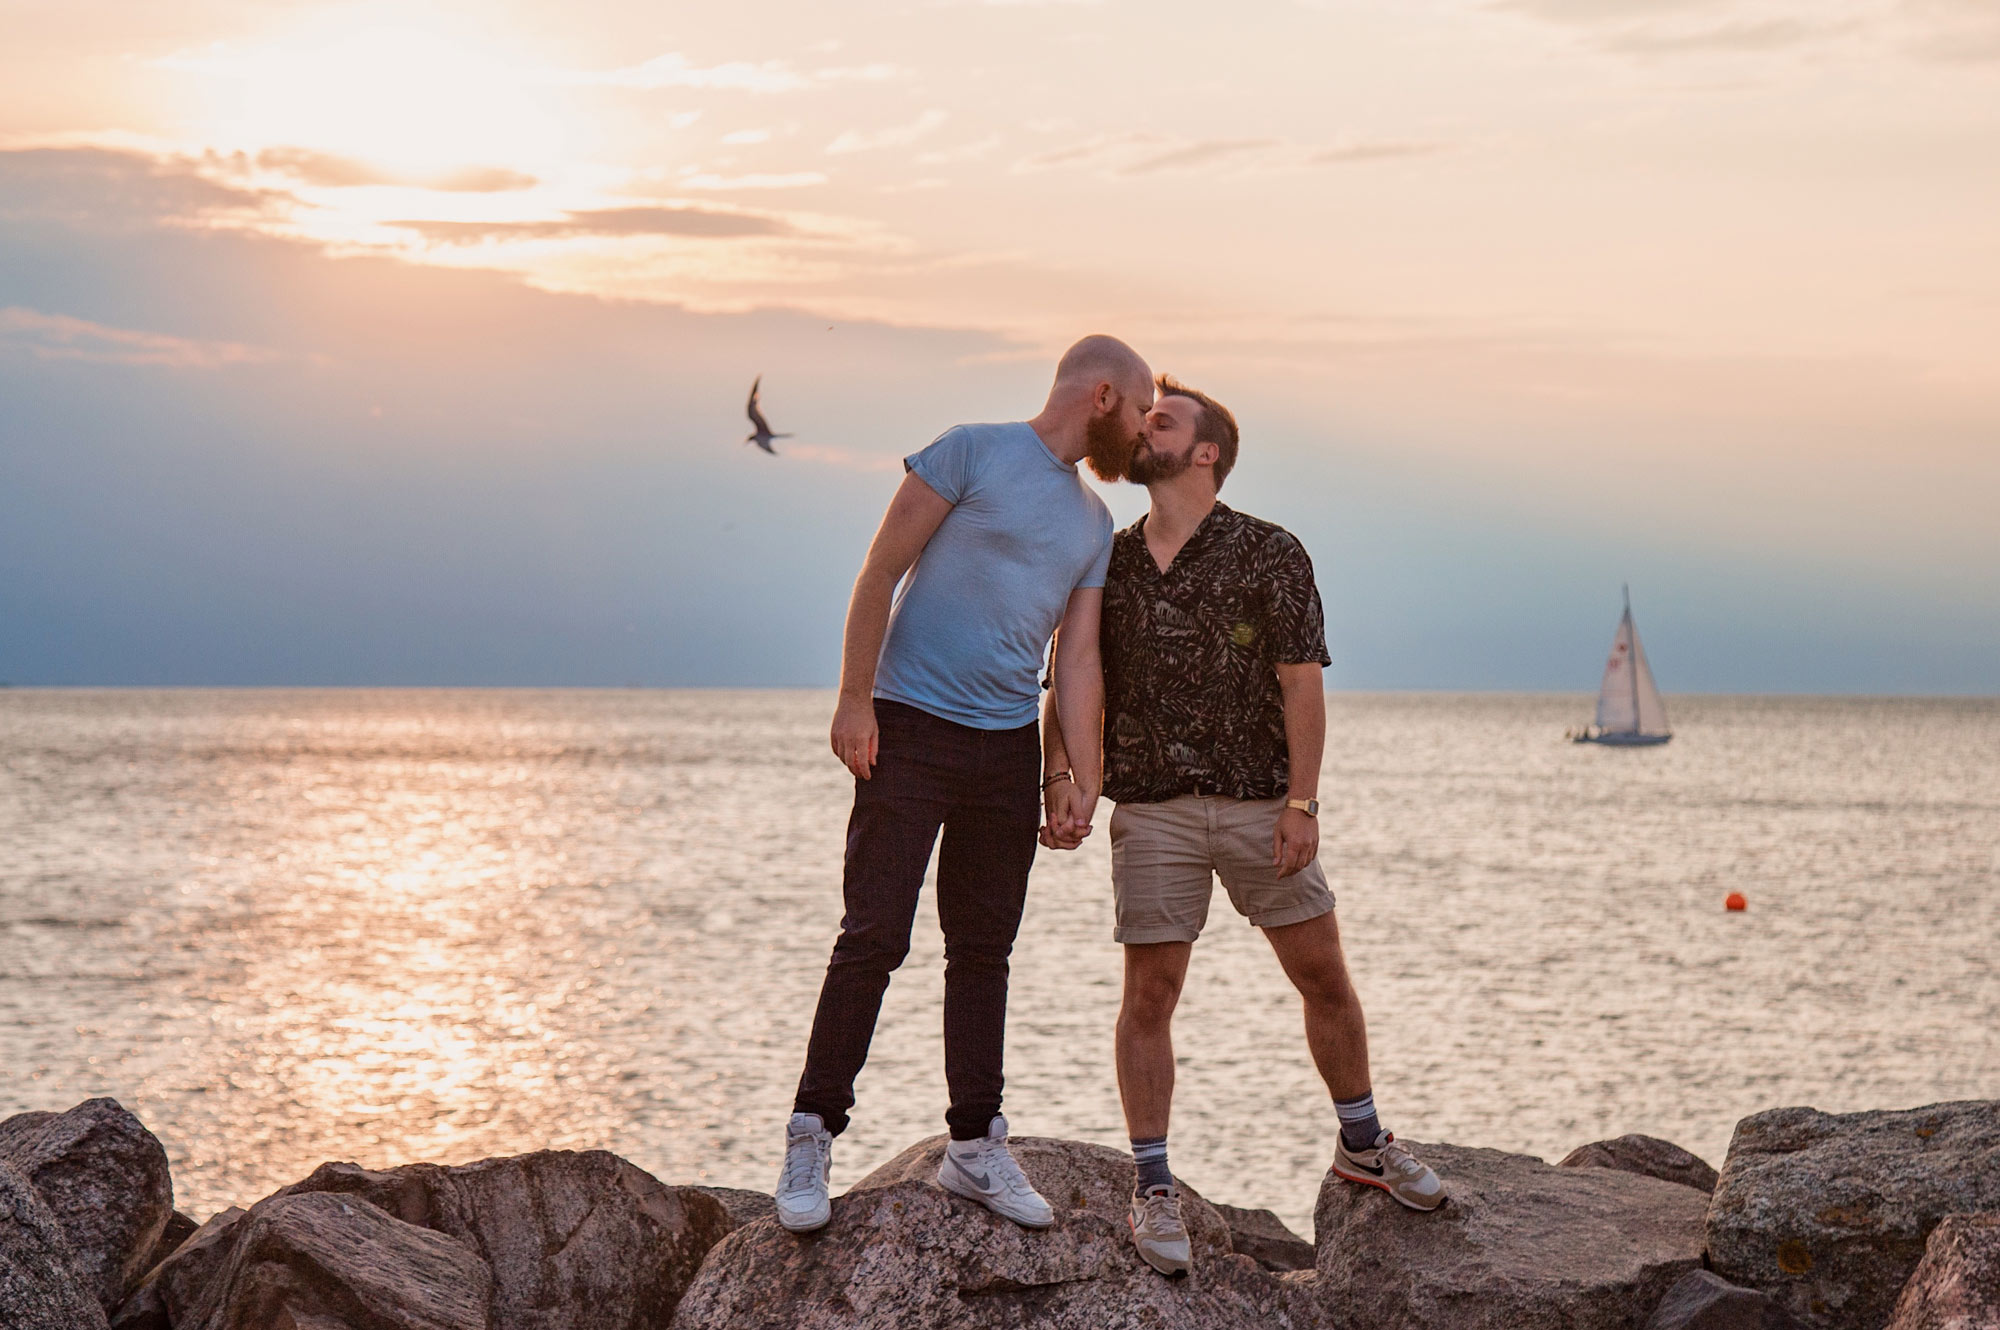 Pride LGBTQ+ rights Movement Malmö Gay City Trip South Sweden A Gay Kiss during Sunset over the Baltic Sea © Coupleofmen.com/ Photo: Maartje Hensen